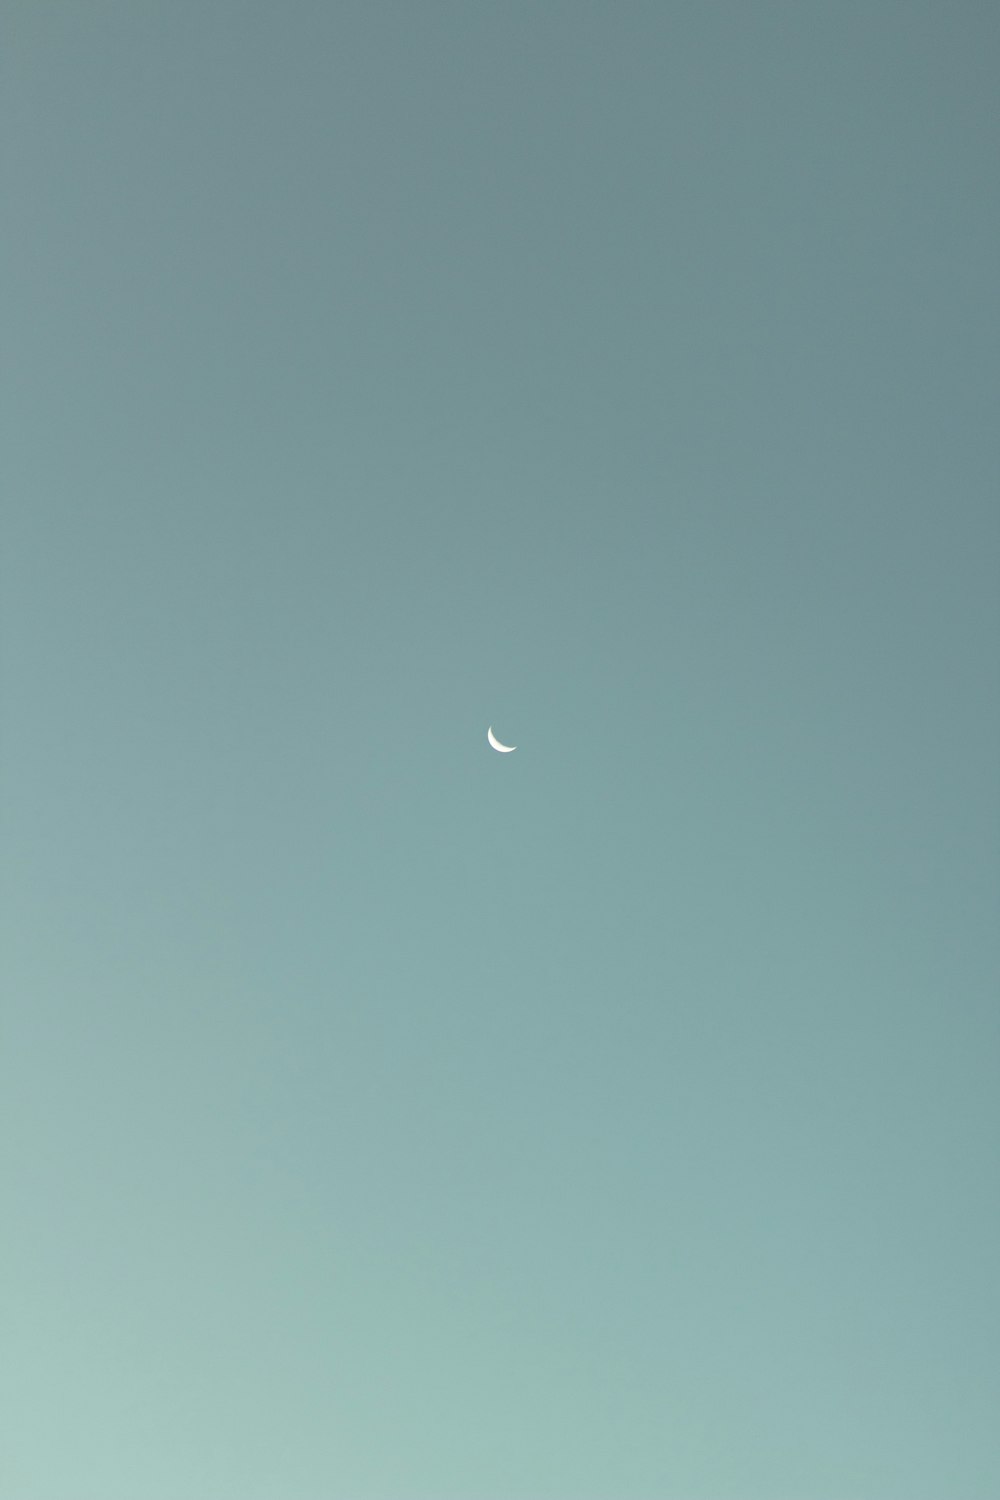 an airplane flying in the sky with a half moon